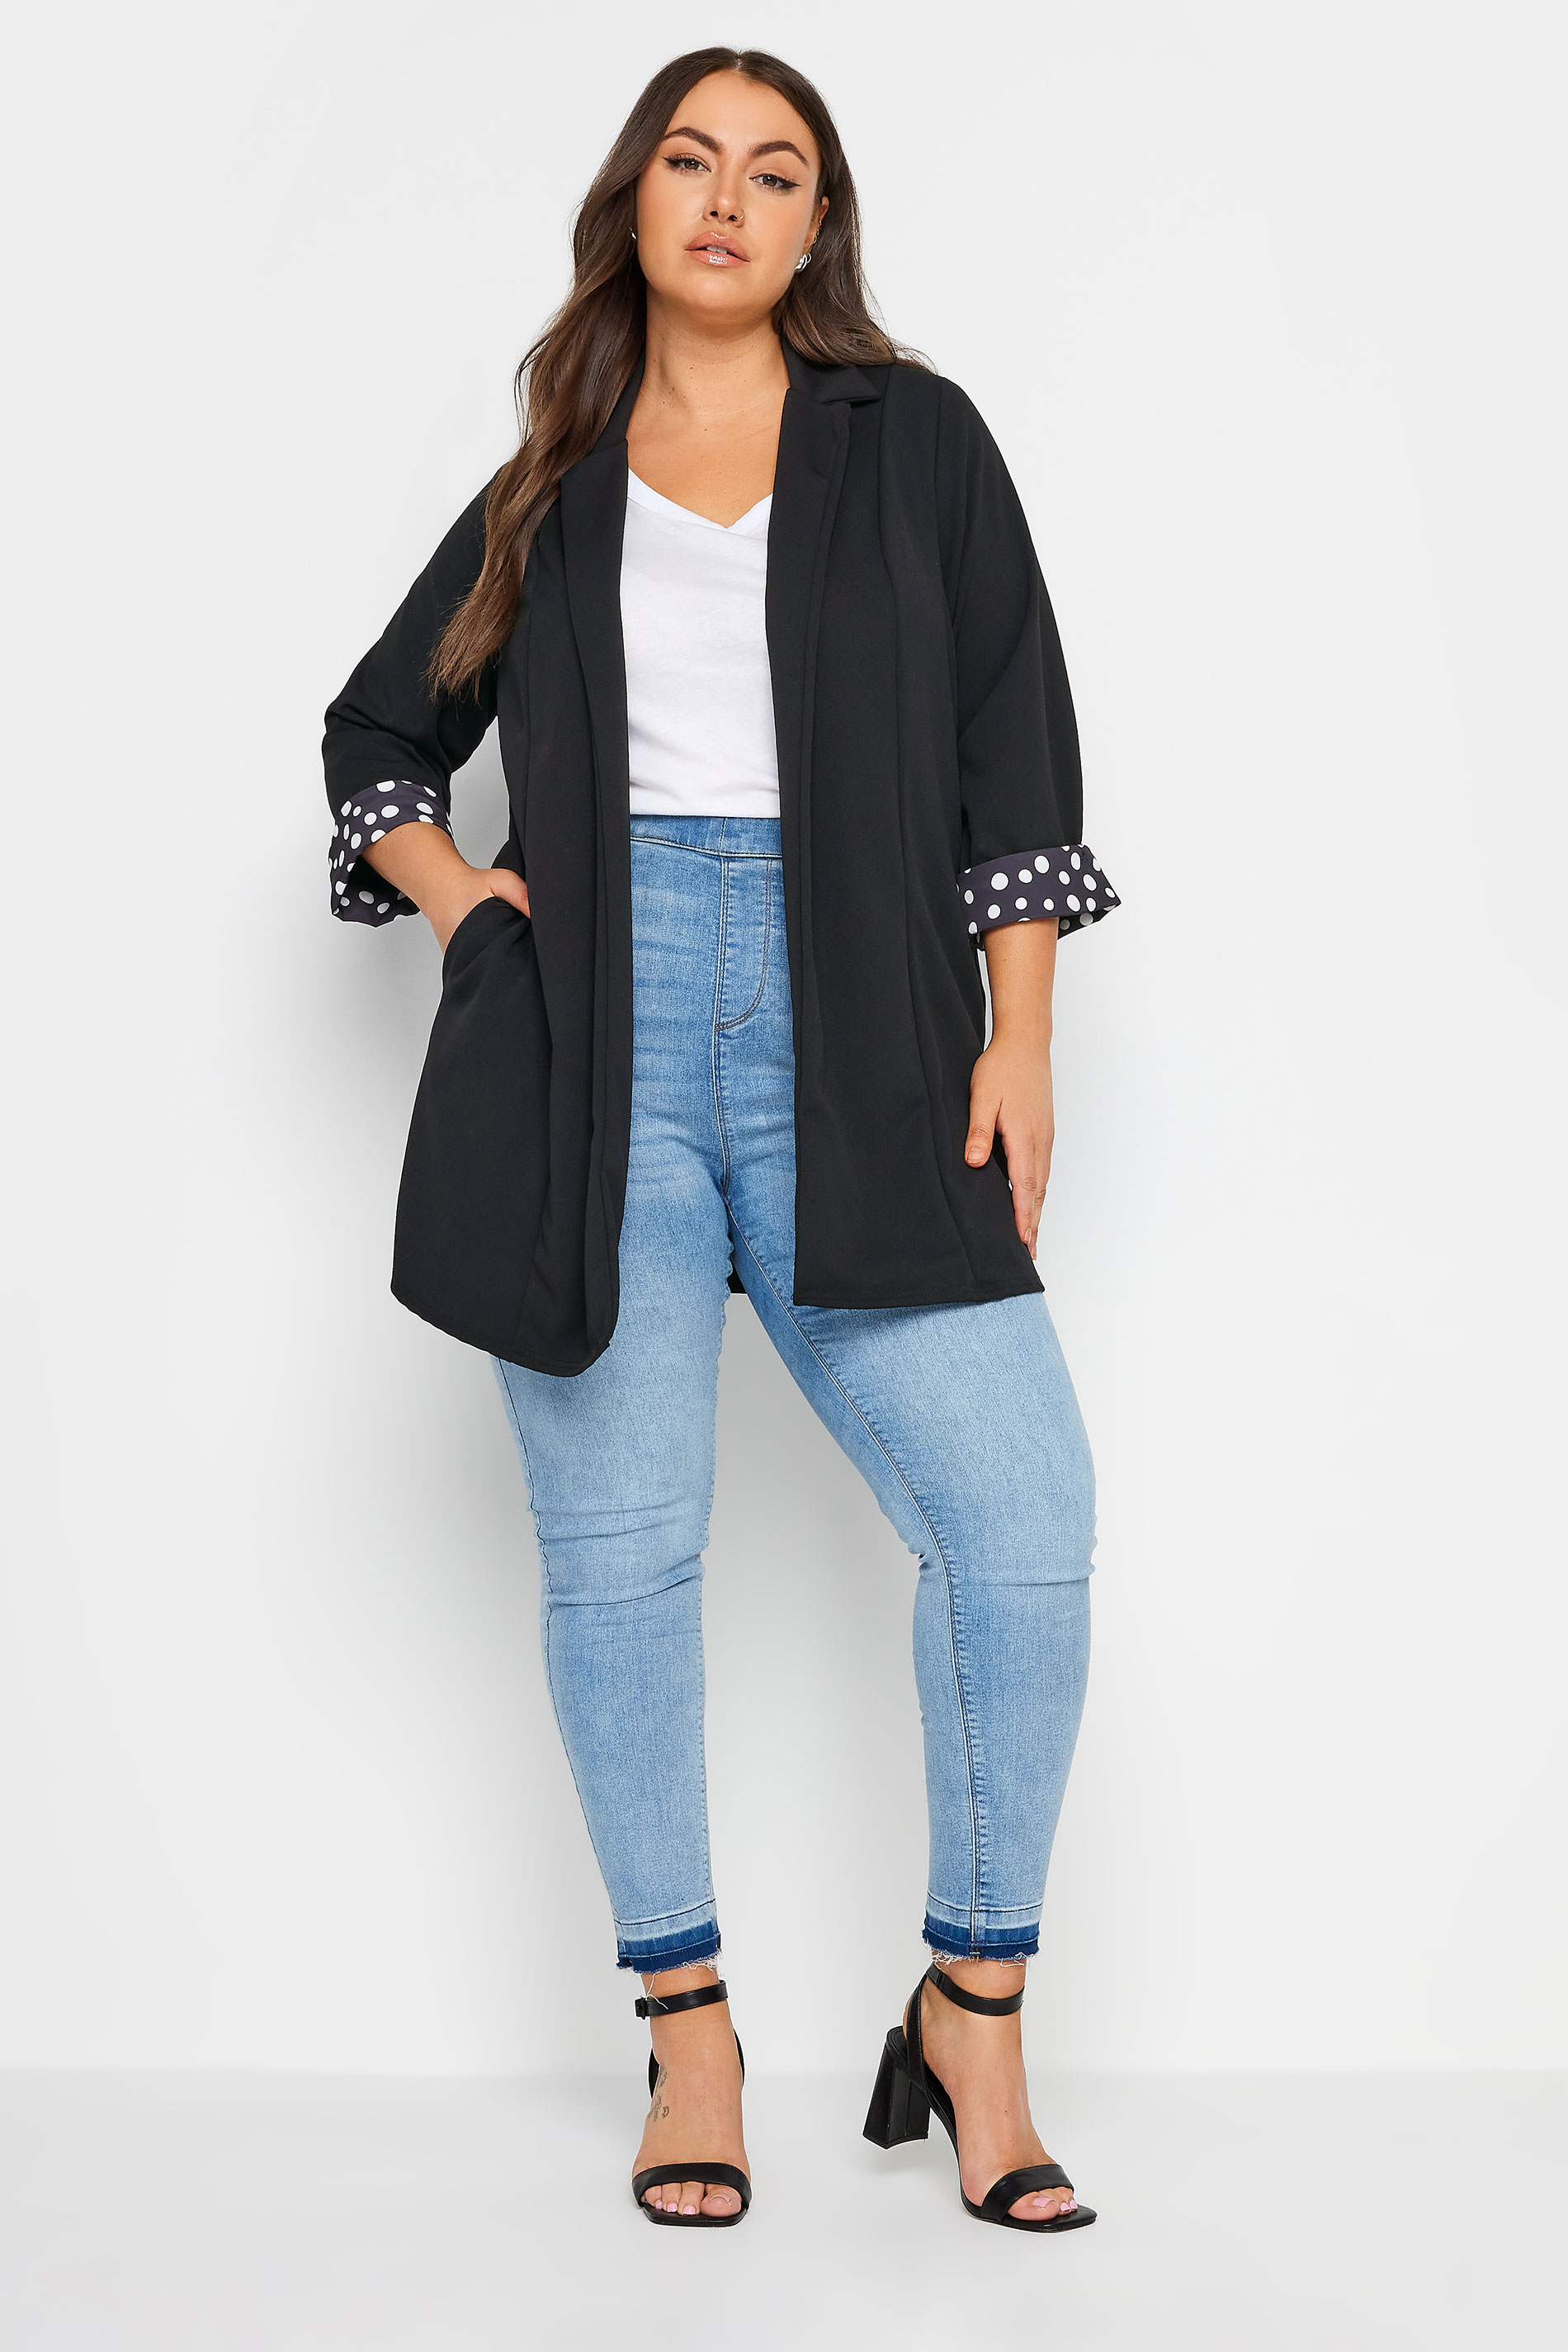 YOURS Curve Plus Size Black Polka Dot Roll Back Sleeve Blazer | Yours Clothing 2